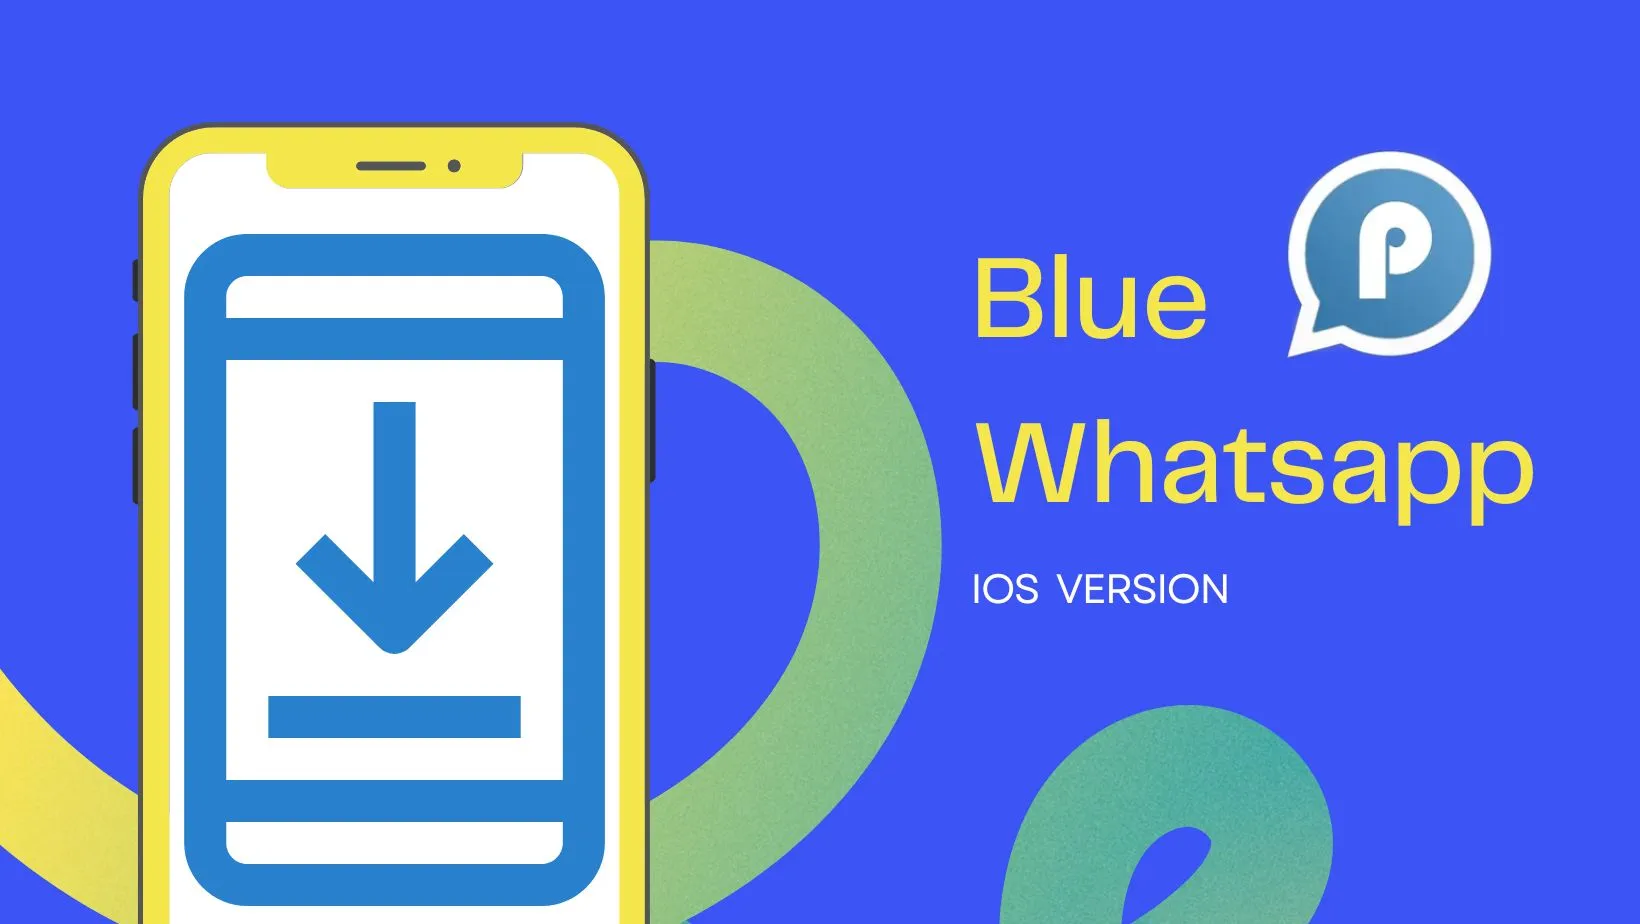 Blue WhatsApp for IOS, WhatsApp for Iphone Users without any Jailbreak